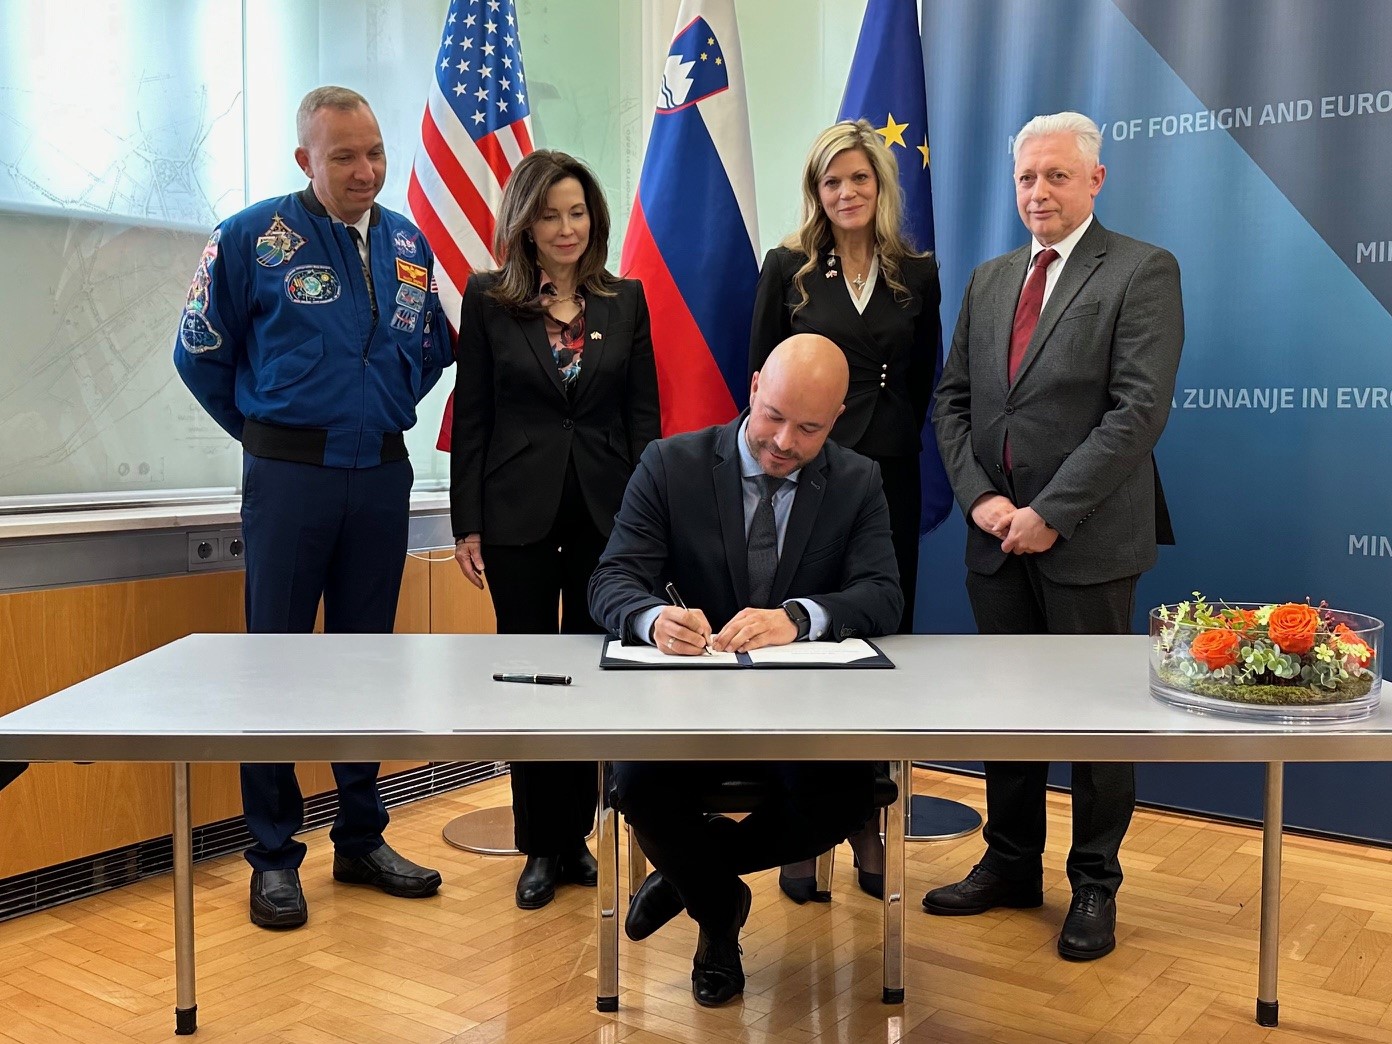 Slovenia Signs Artemis Accords, Joins Pursuit of Safer Space